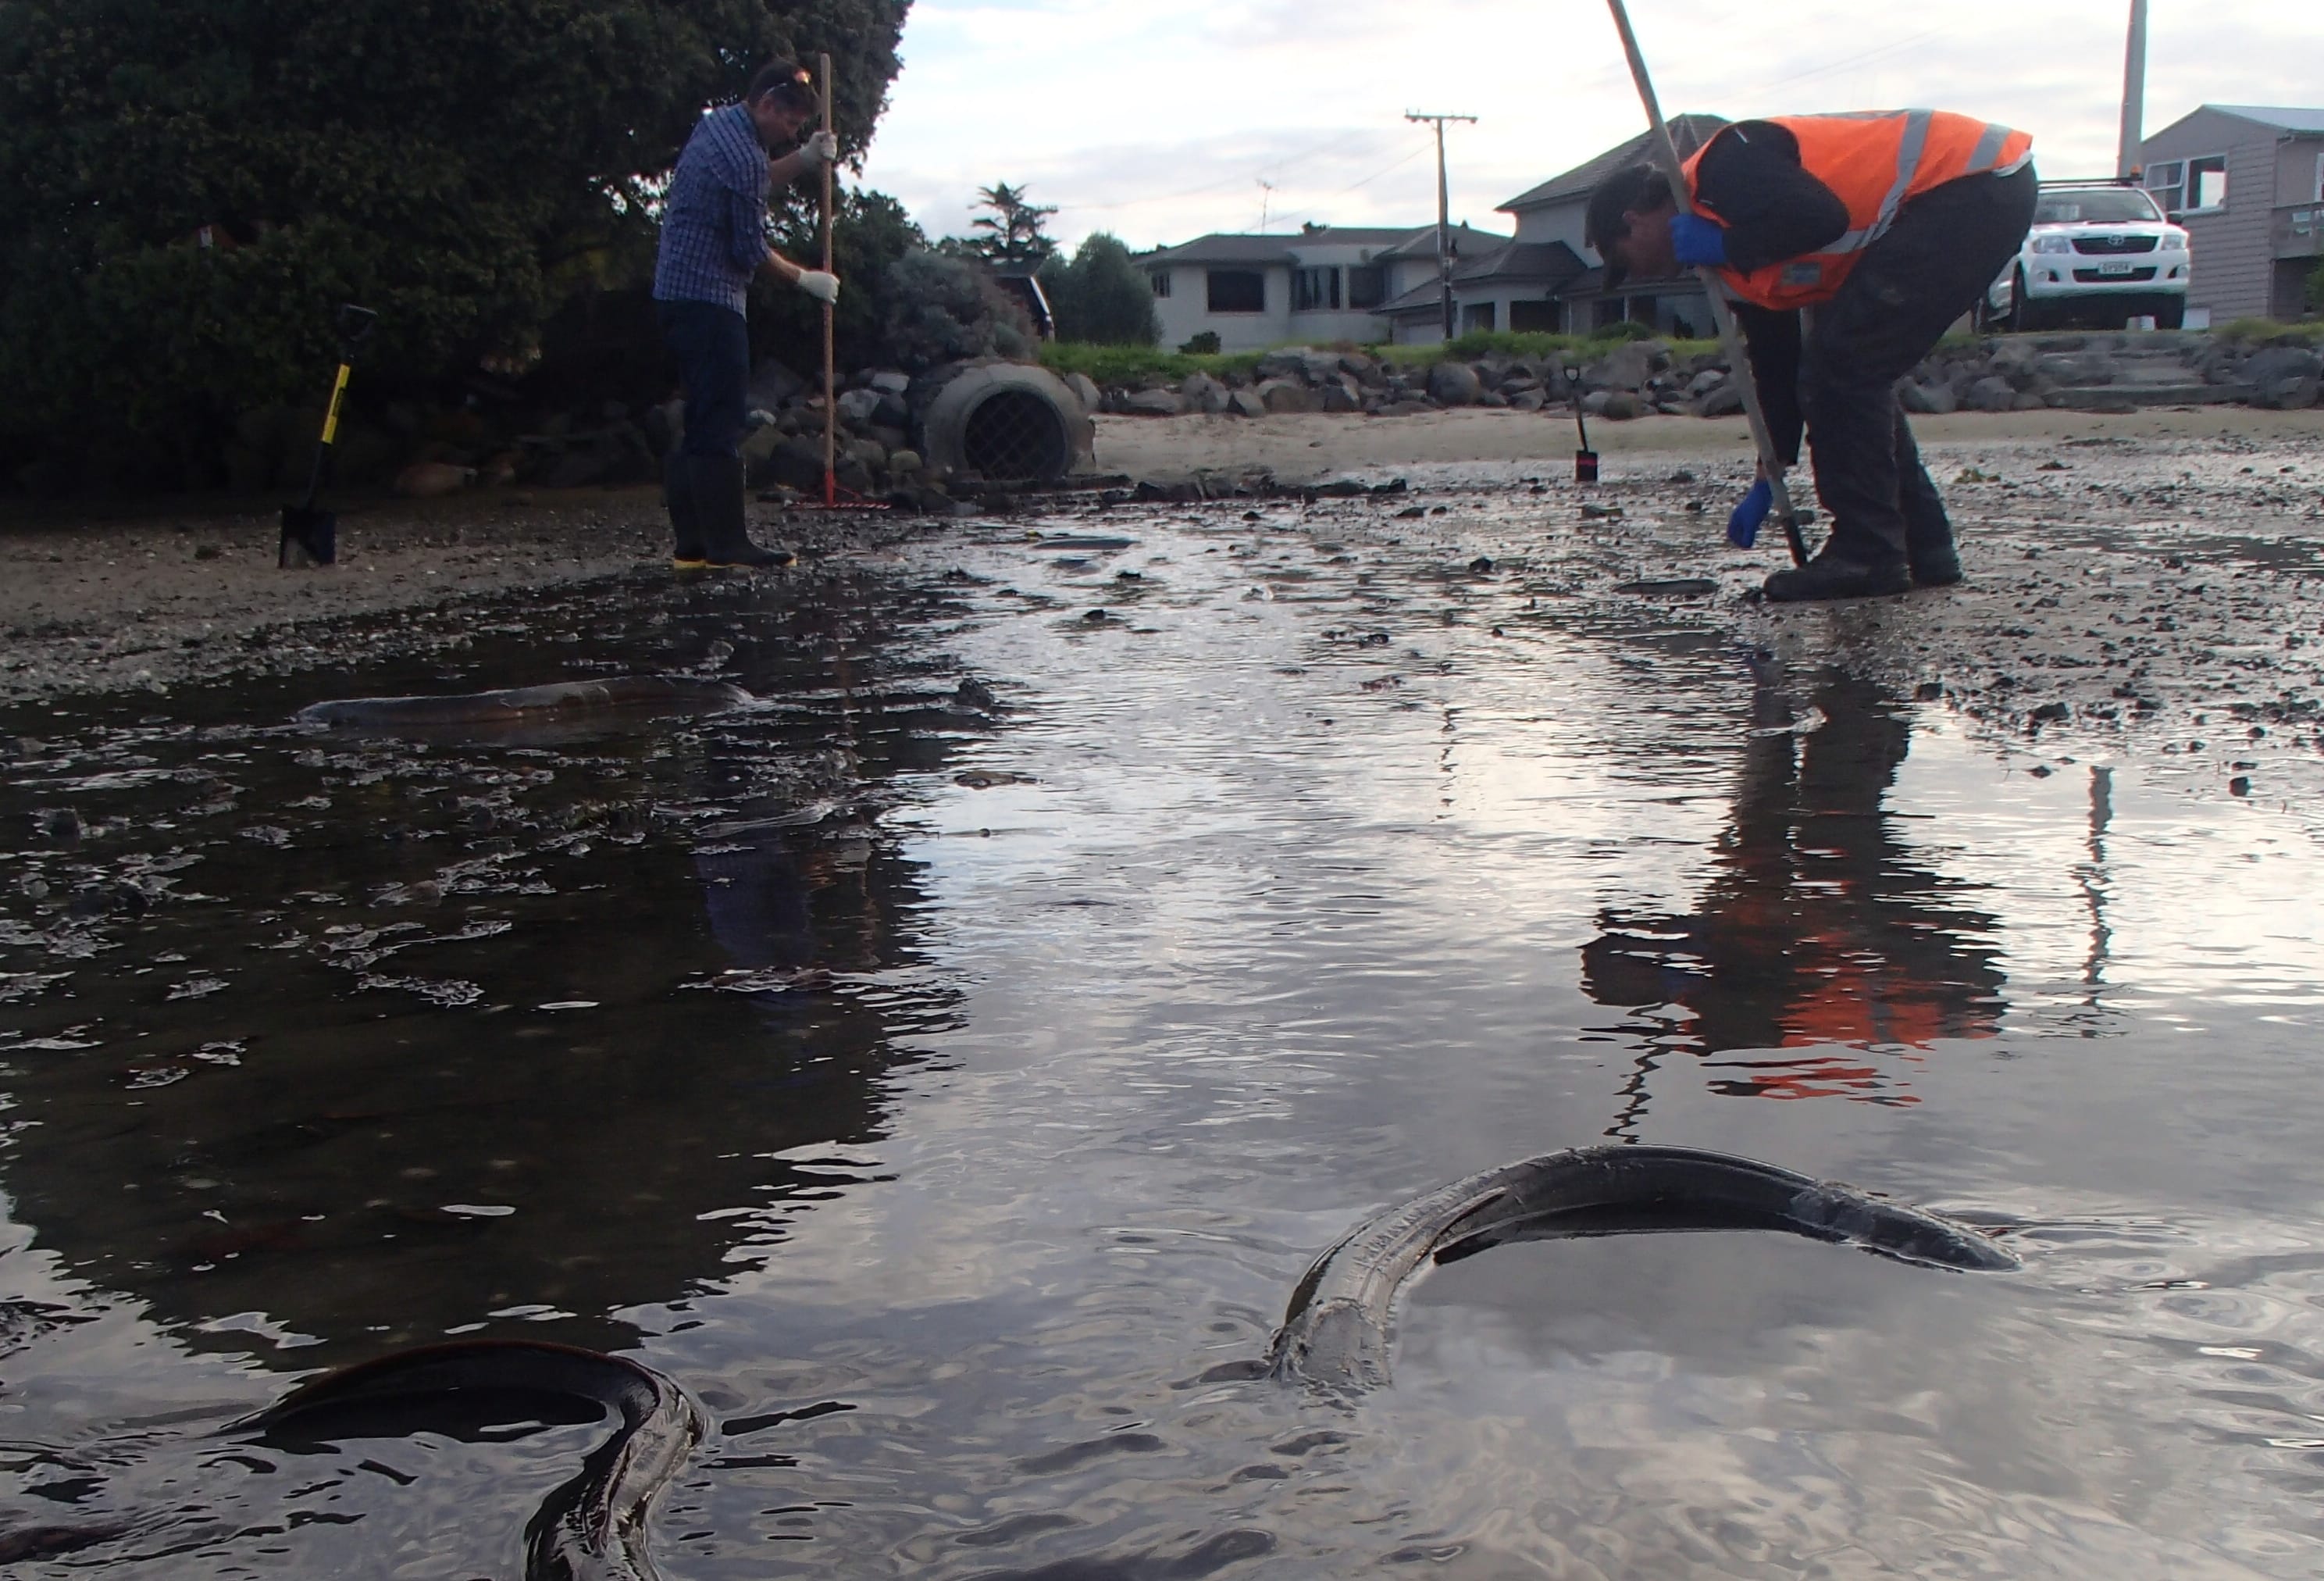 Dozens of dead or distressed eels were found at an outlet near Tauranga's Memorial Park.